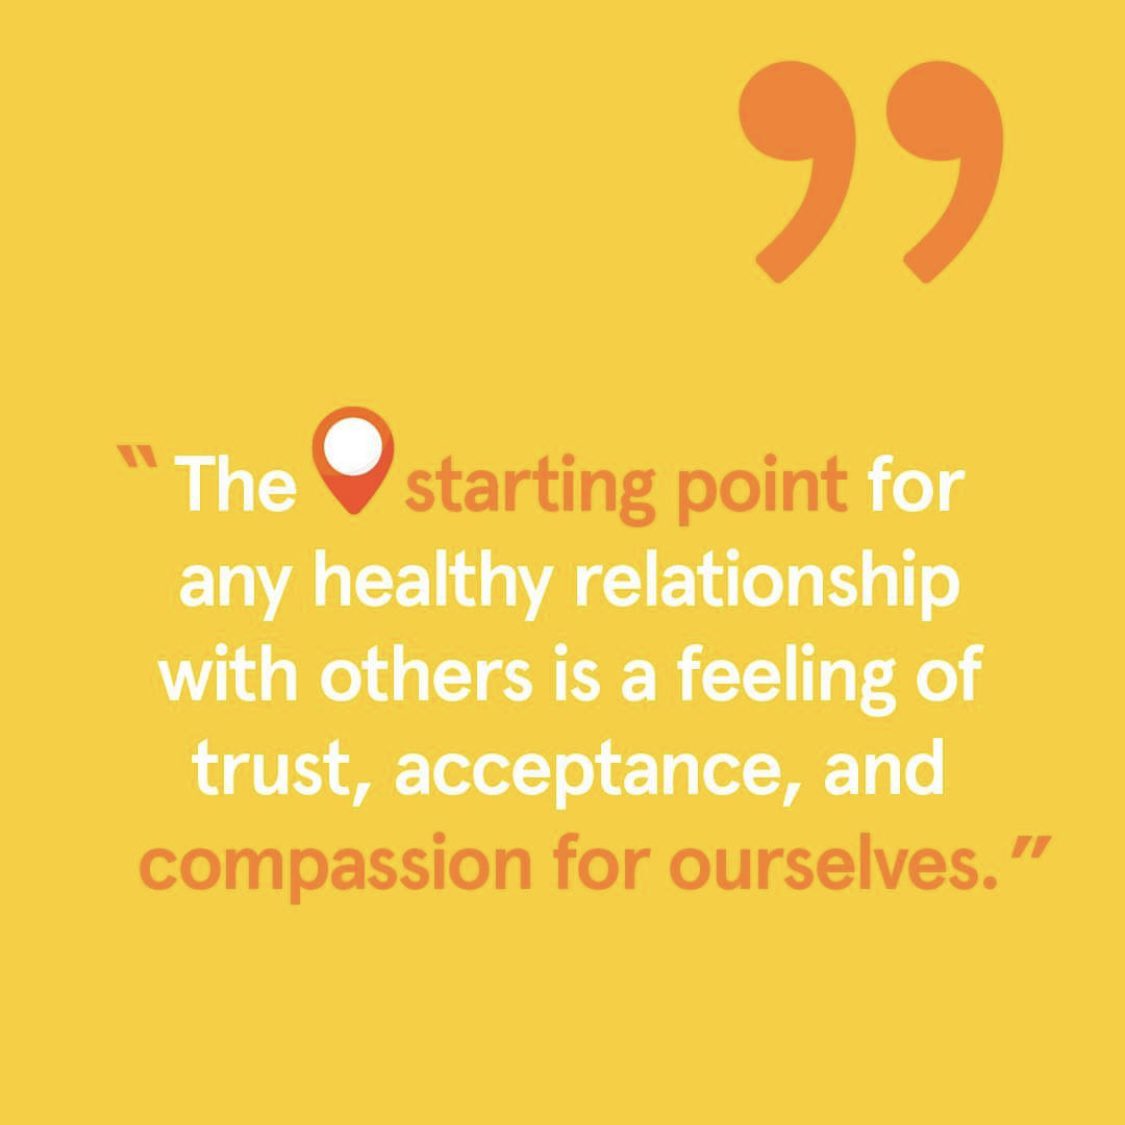 For healthy relationships with others we need acceptance and compassion for ourselves Image: @Headspace